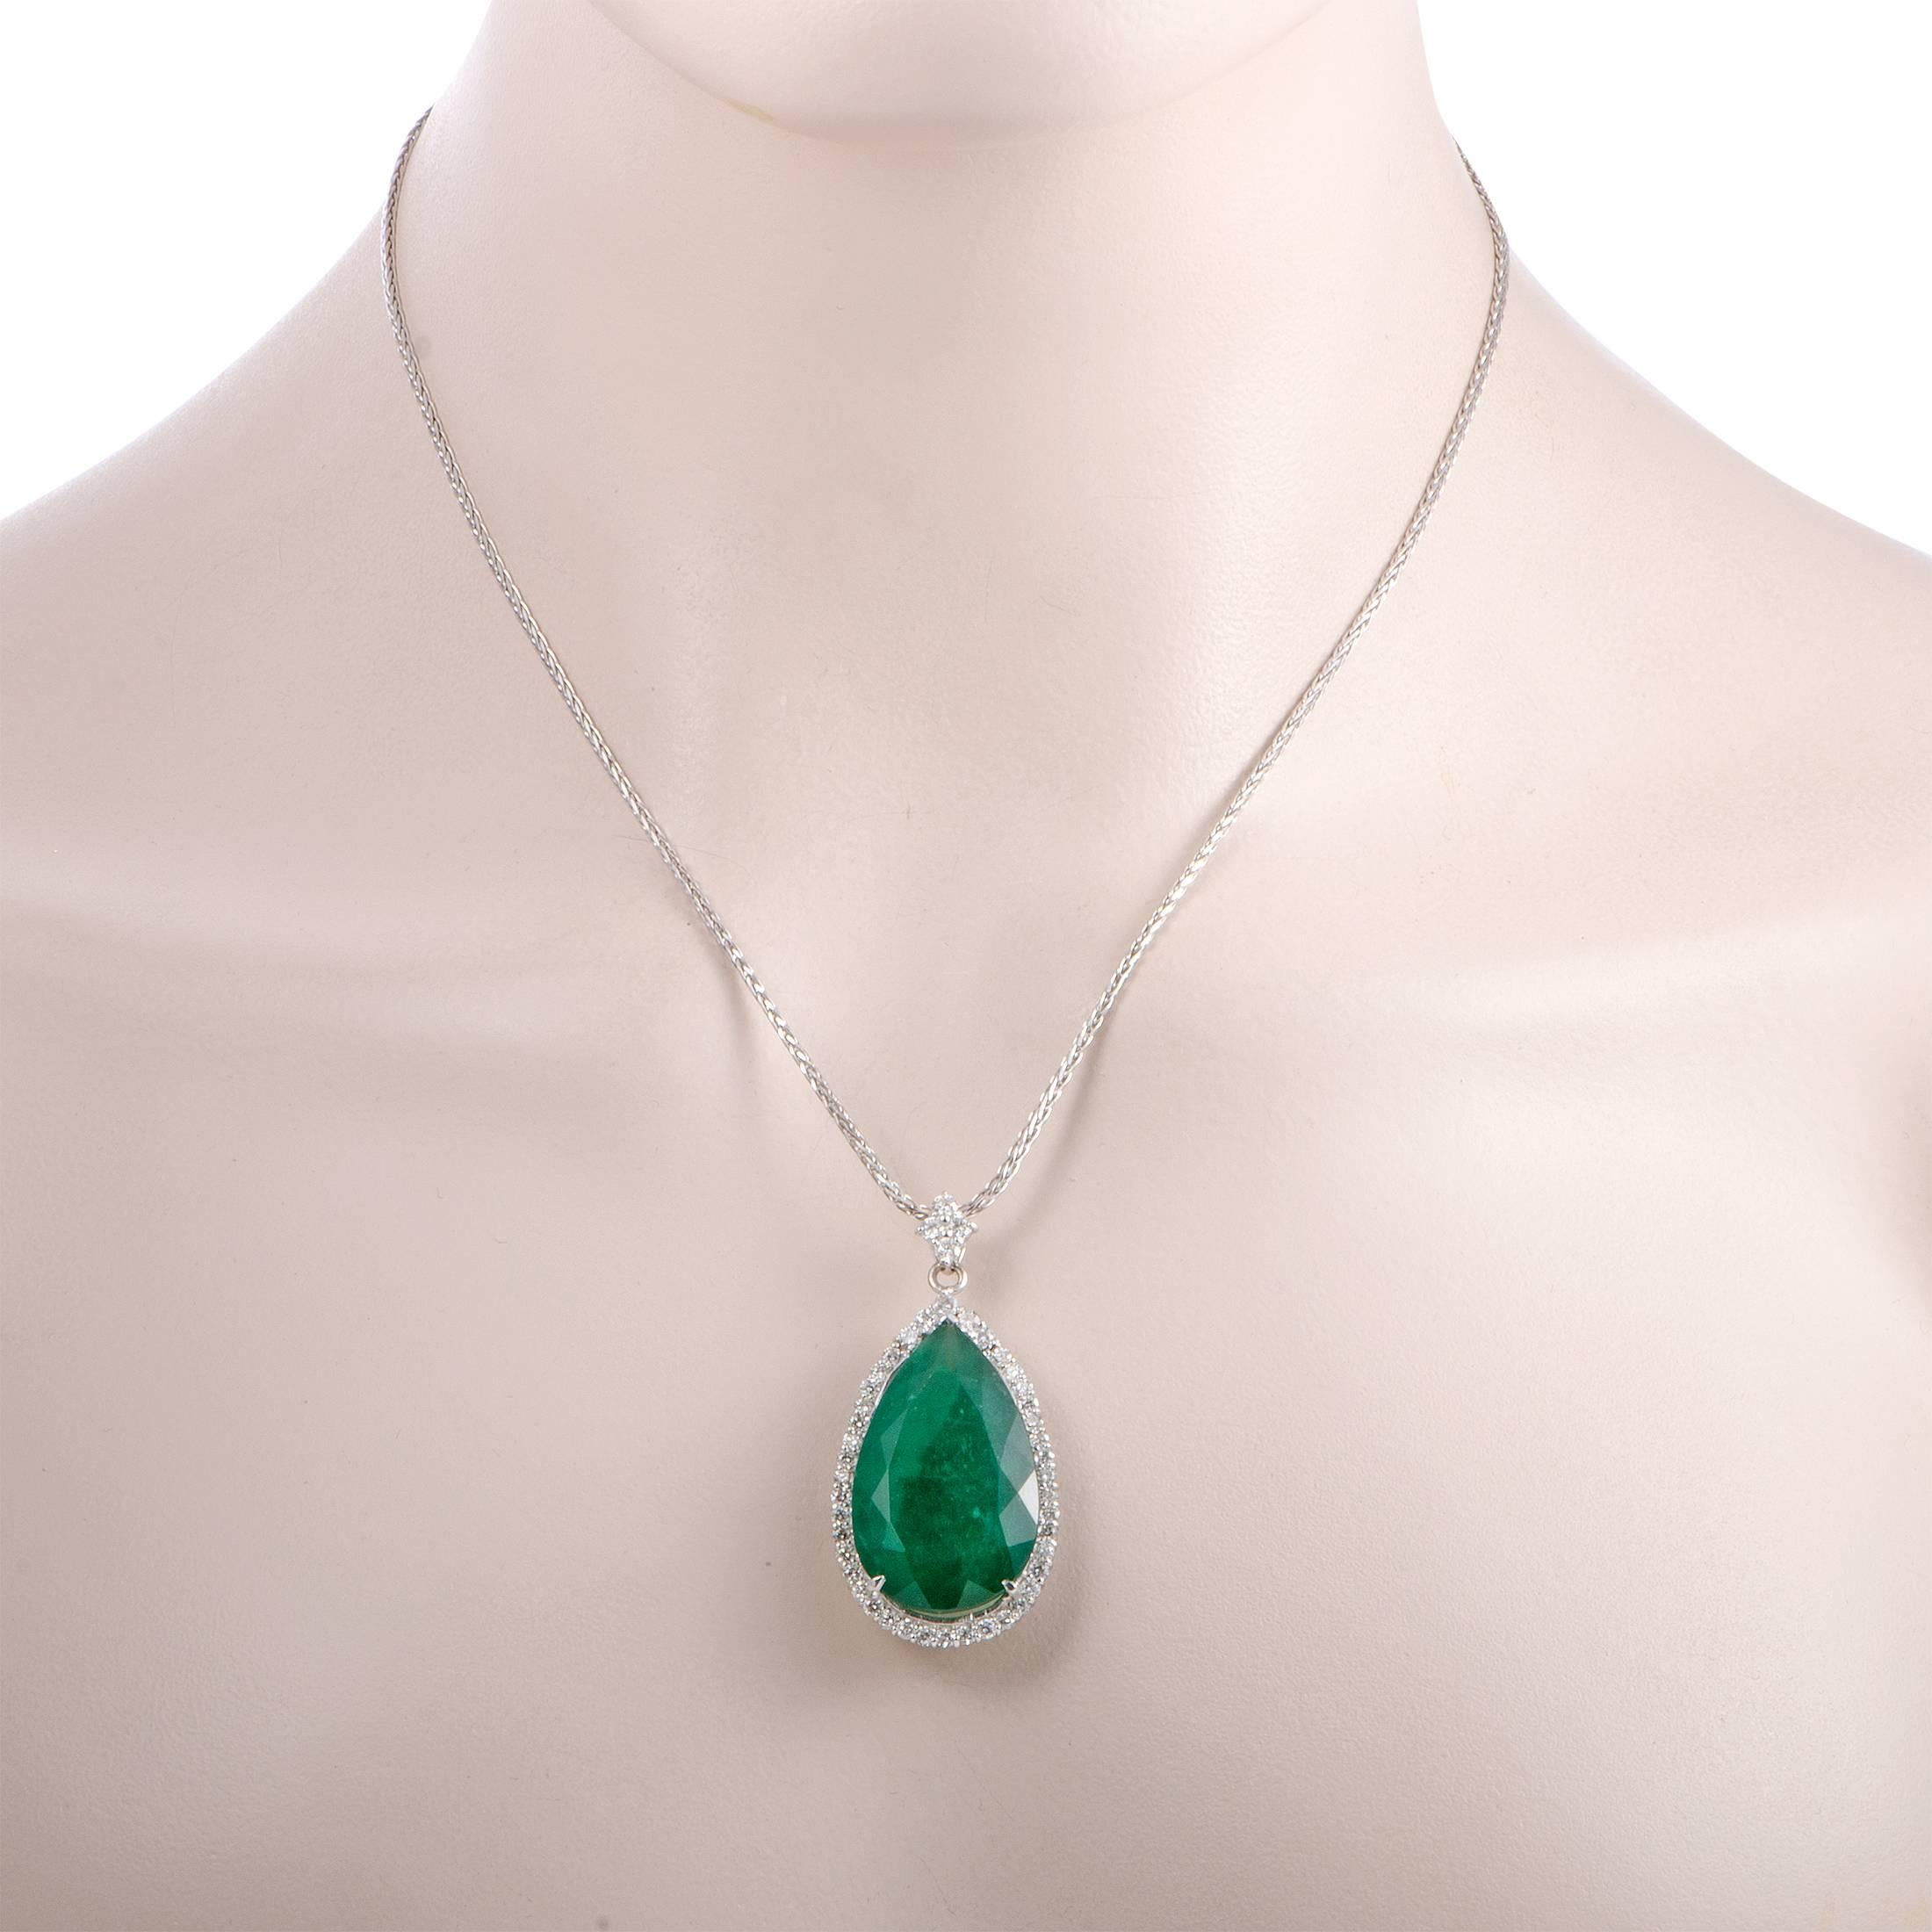 The exquisitely cut emerald steals the show in this superb 18K white gold necklace that features a dainty chain onto which an eye-catching pendant is attached. The emerald weighs 33.30 carats and it is accompanied by 2.10 carats of scintillating